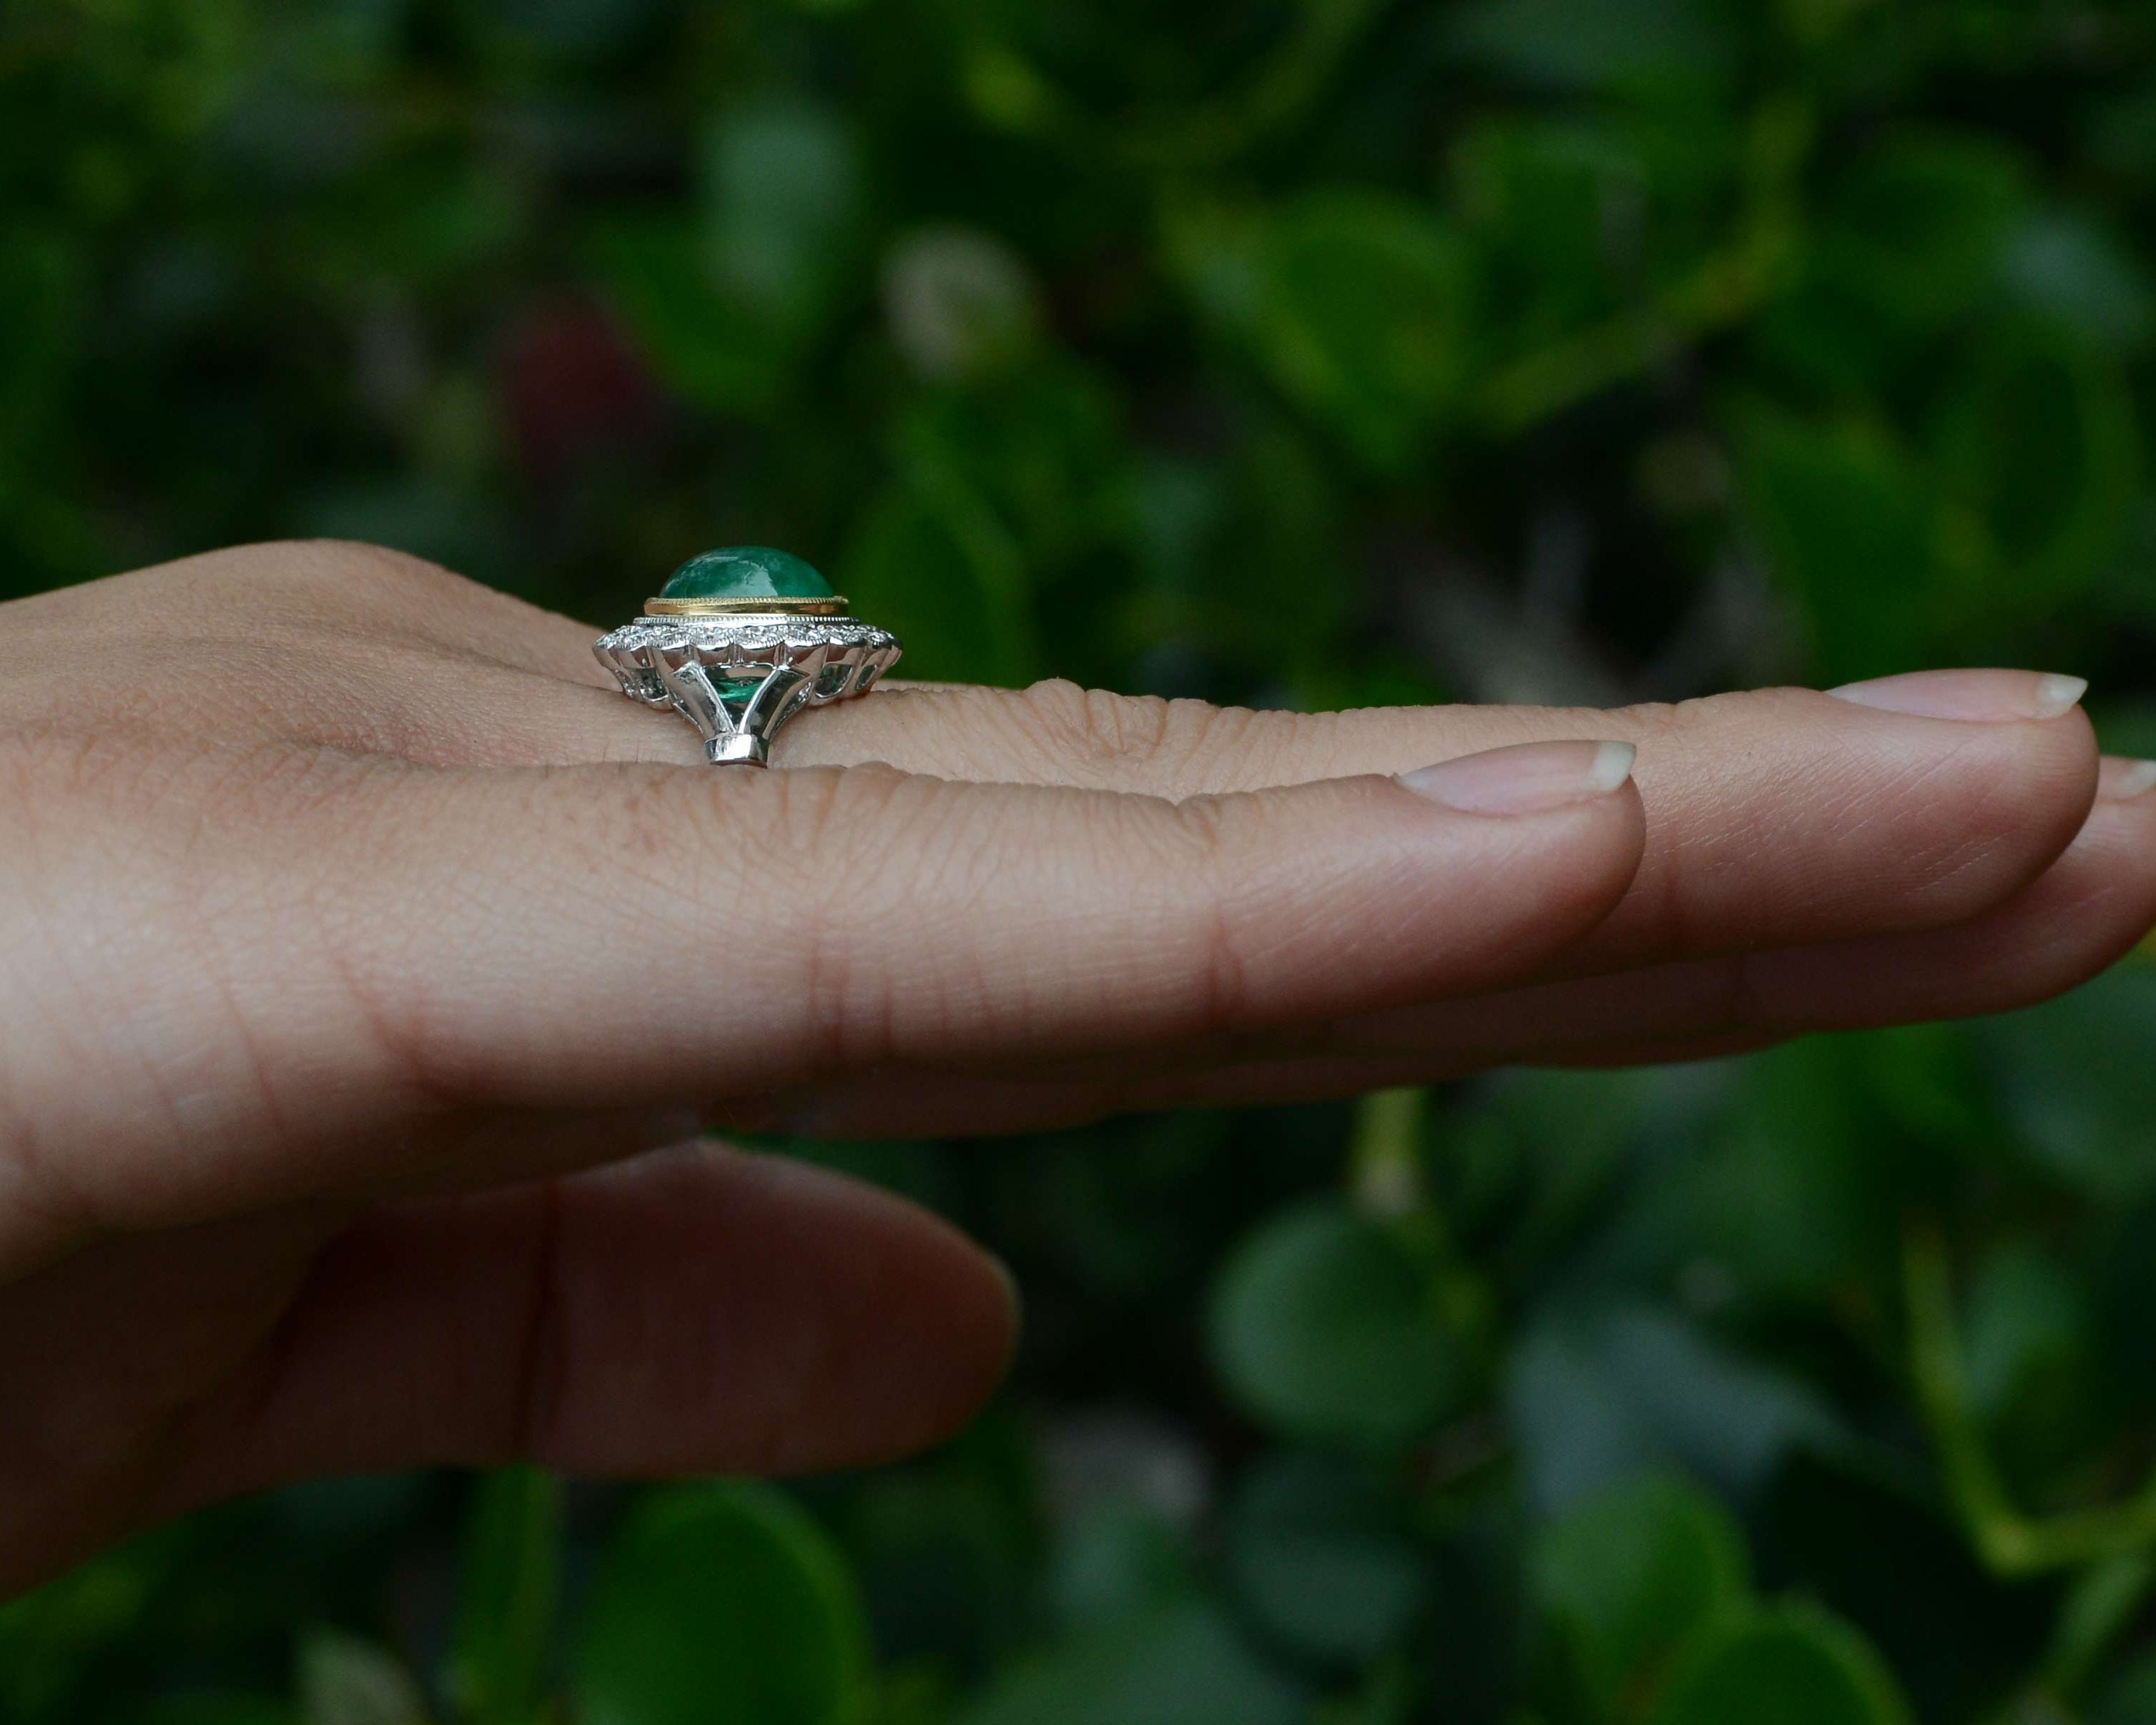 A 2 carat oval cabochon emerald statement ring.